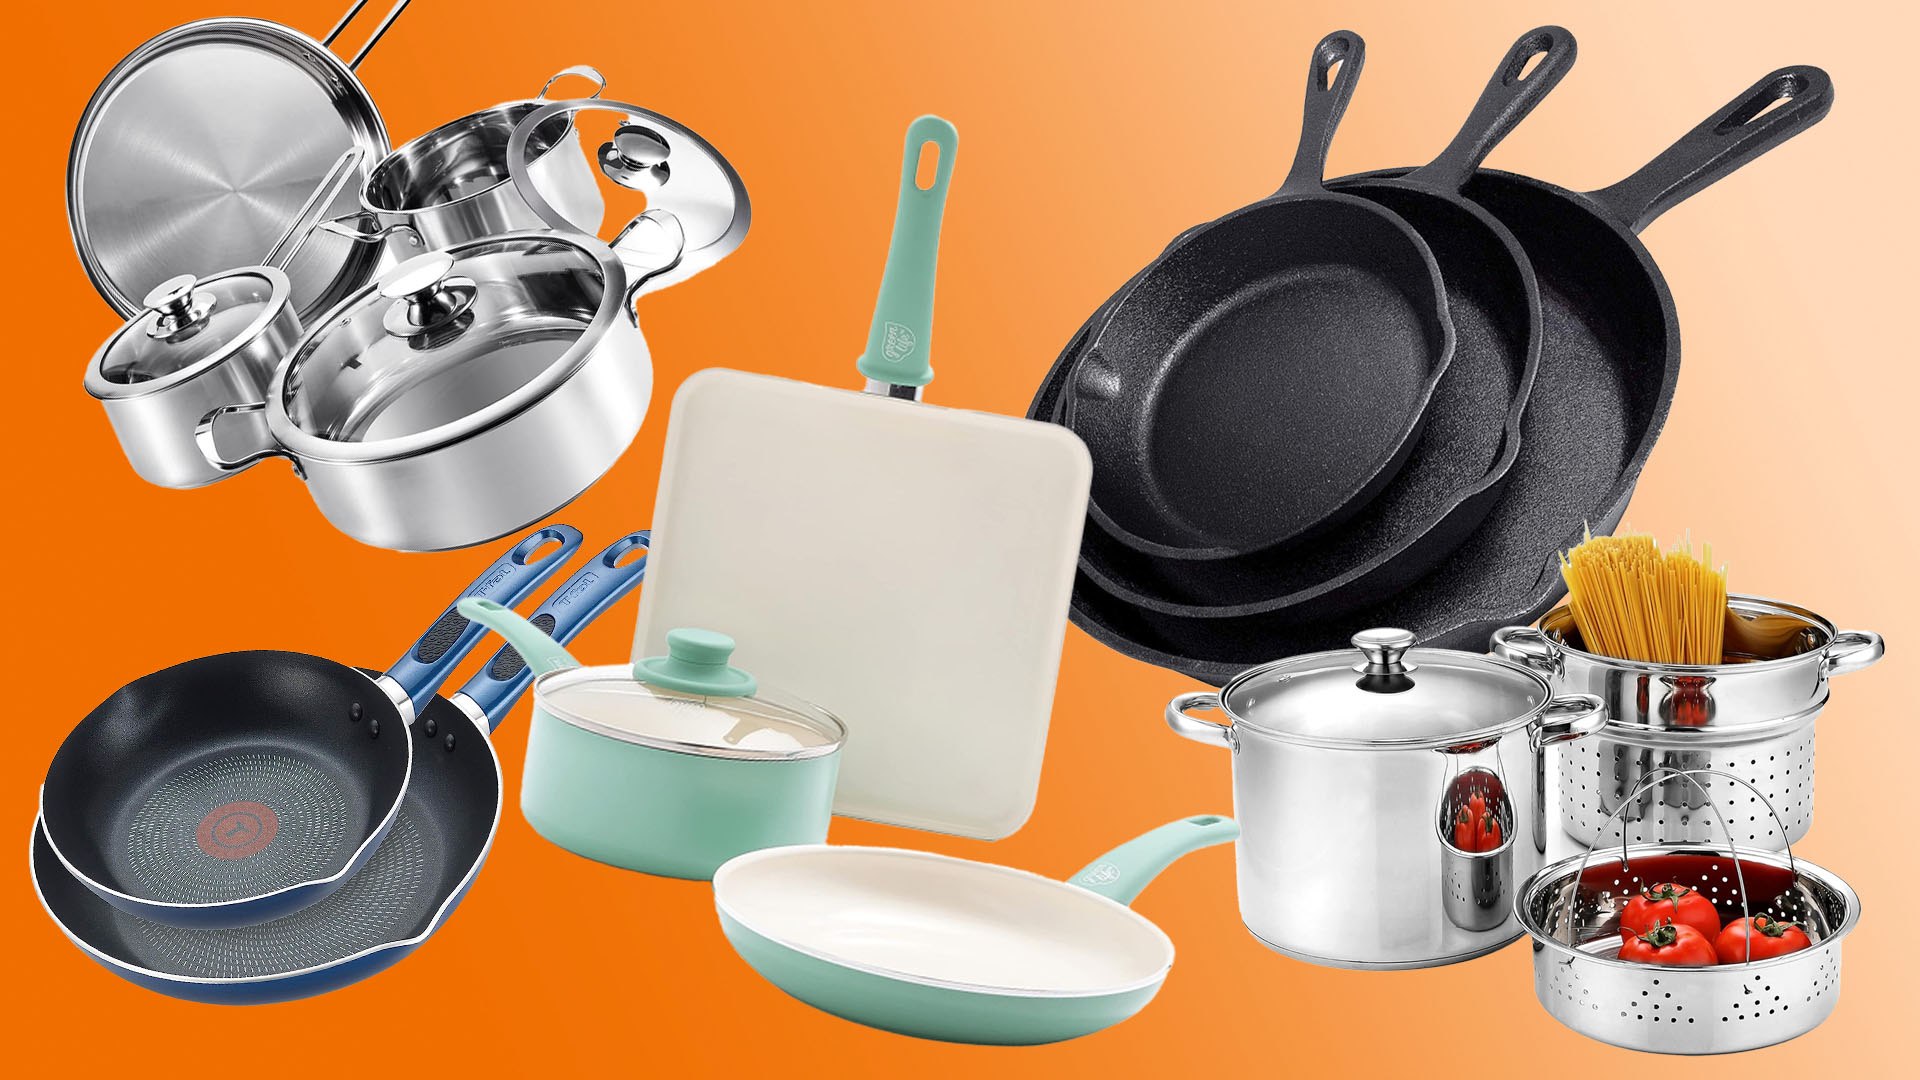 TTop 12 Cooking Utensils to Have In Your Kitchen